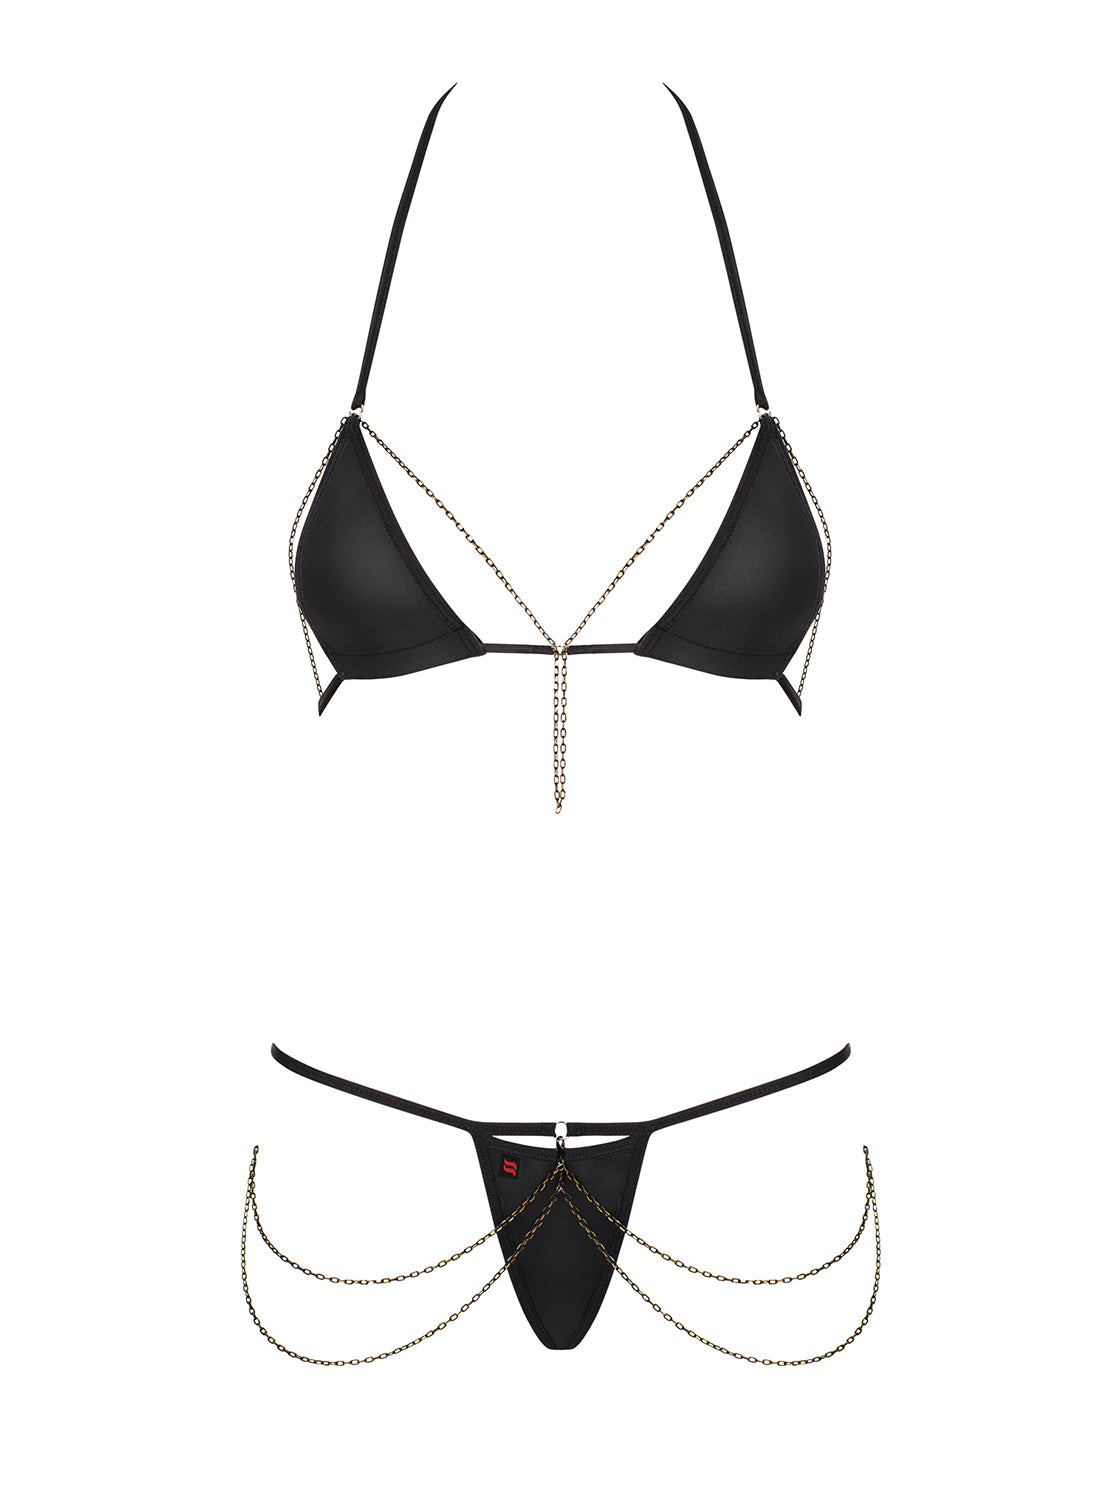 Beautiful lingerie set consisting of an adjustable halterneck bra, a thong and removable decorative chains